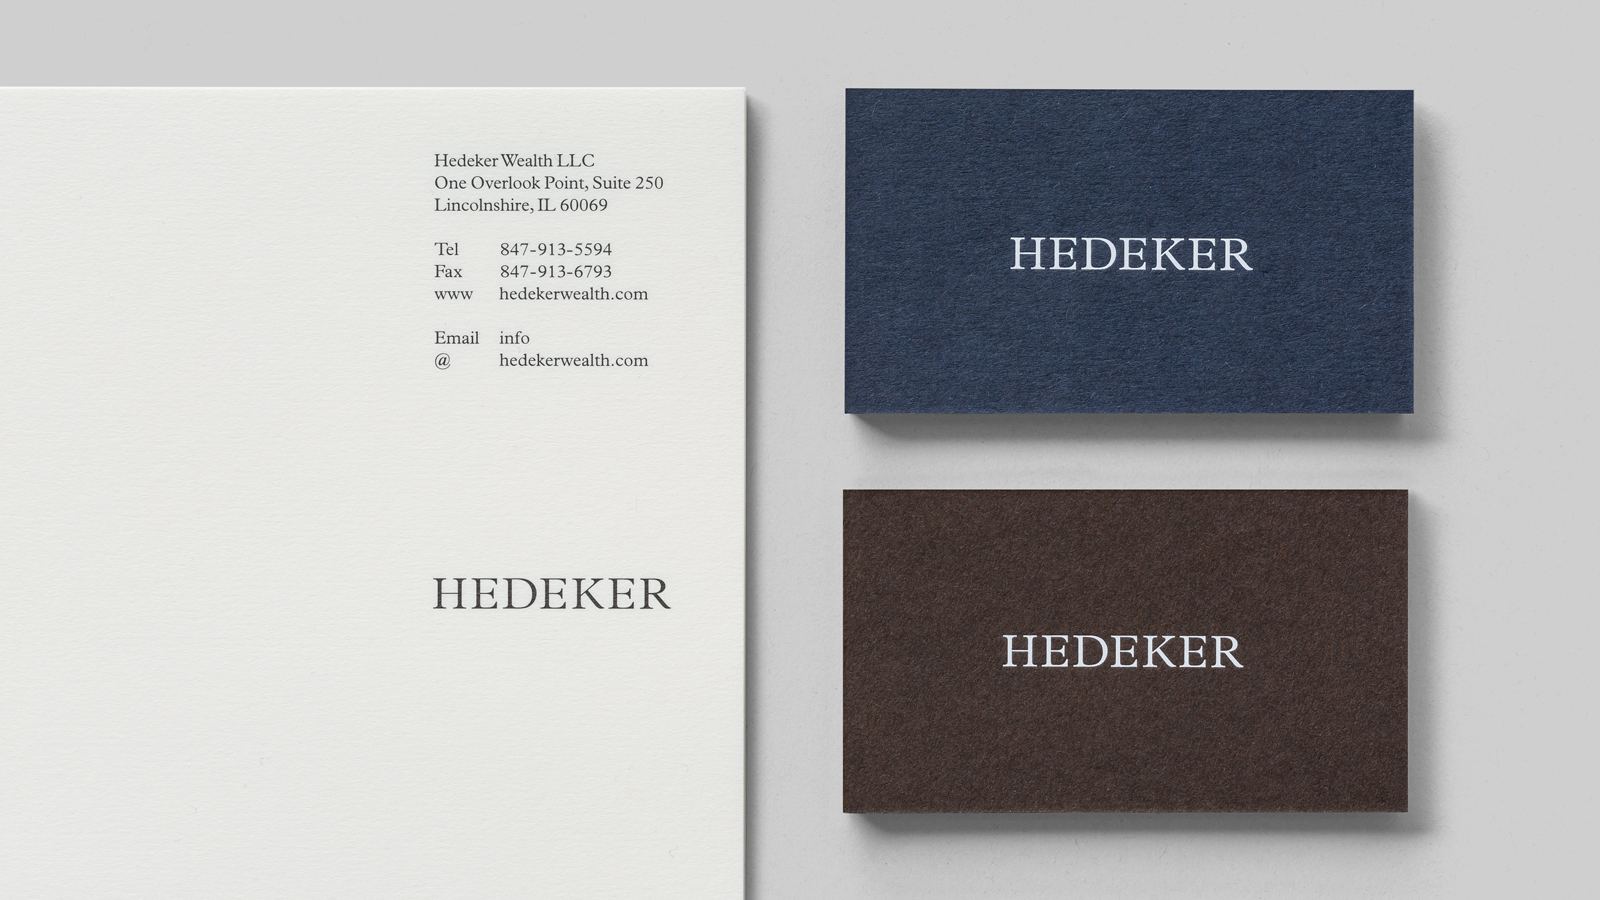 Logo, letterhead and business cards for Illinois based Hedeker Wealth & Law by Socio Design